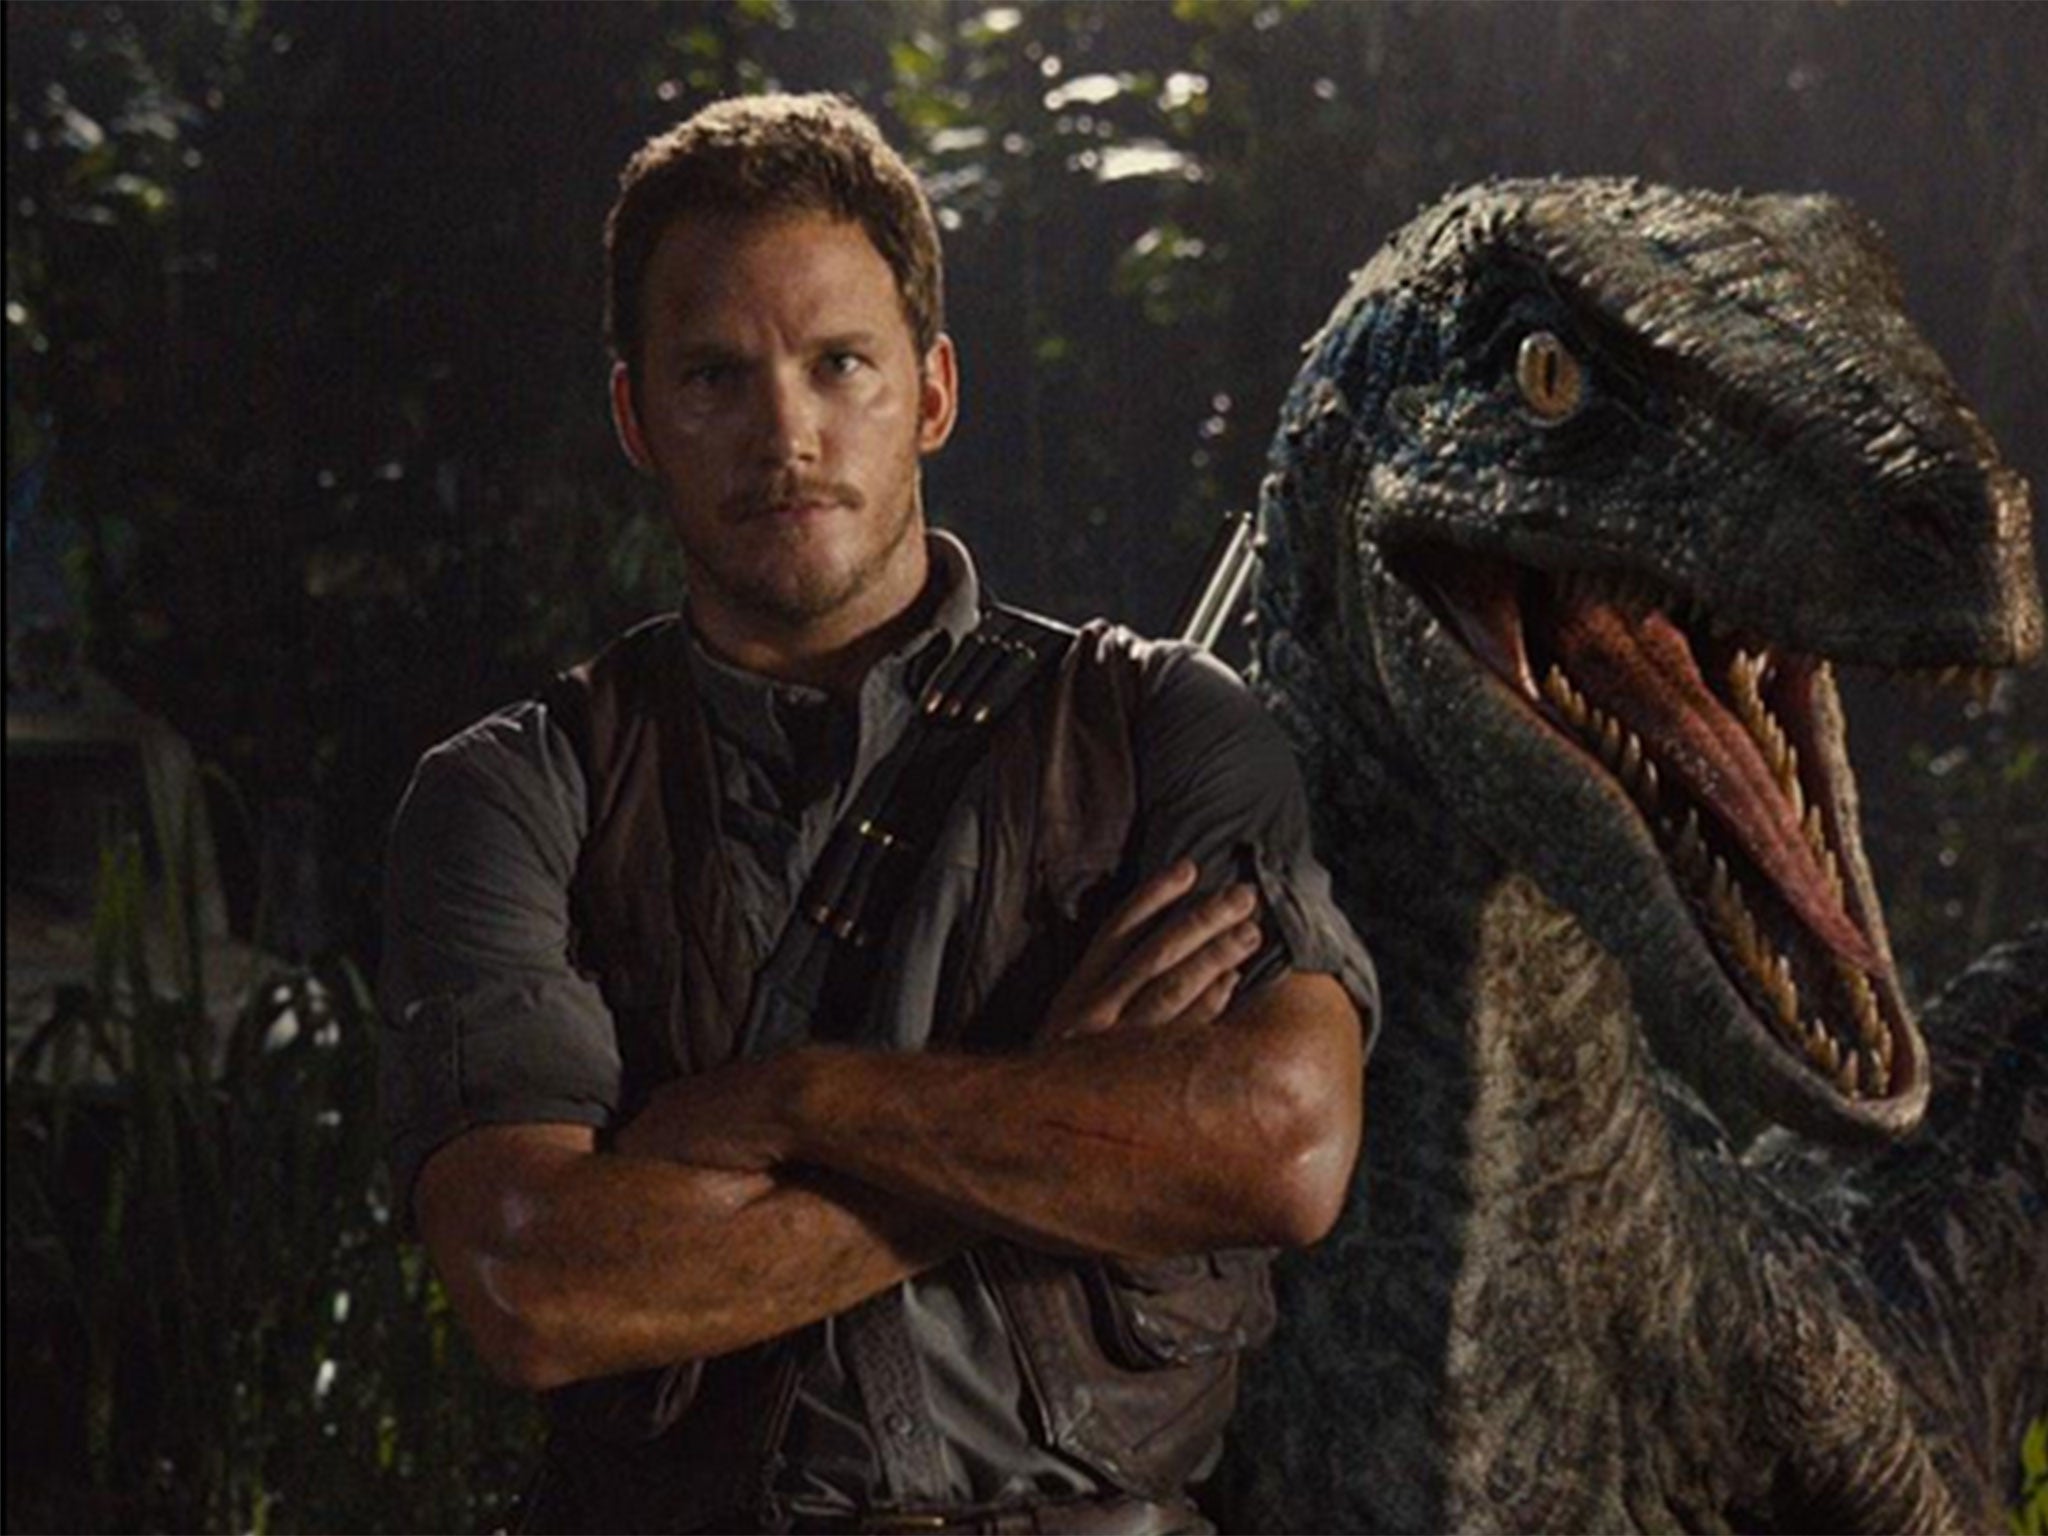 Jurassic World refutes scientific criticism in scene about why its  dinosaurs lack feathers, The Independent